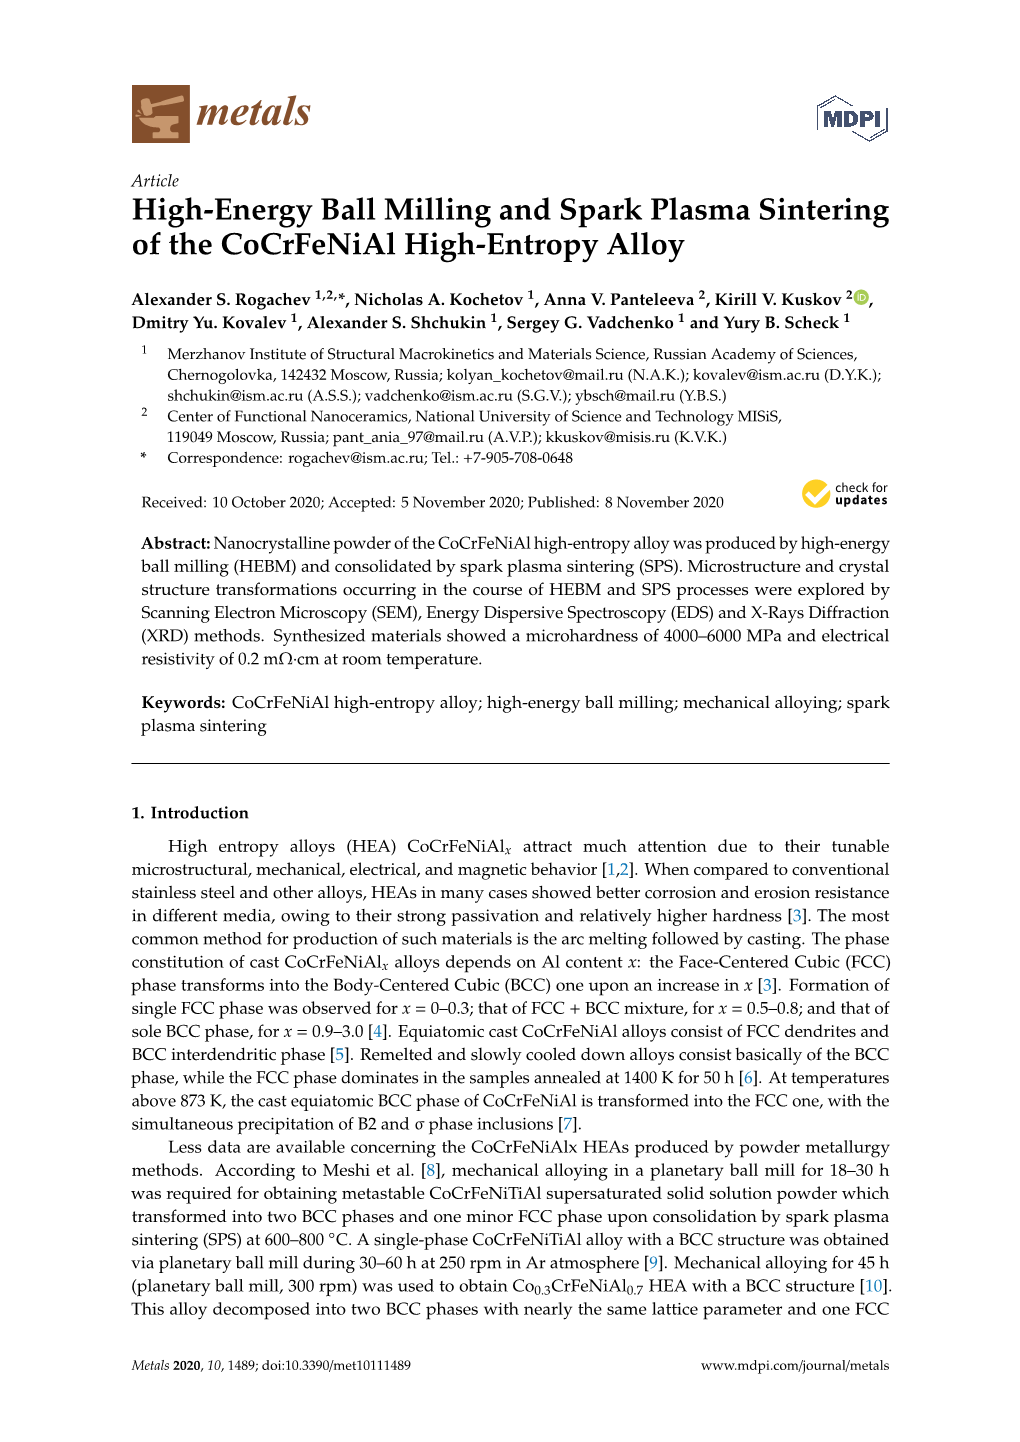 High-Energy Ball Milling and Spark Plasma Sintering of the Cocrfenial High-Entropy Alloy